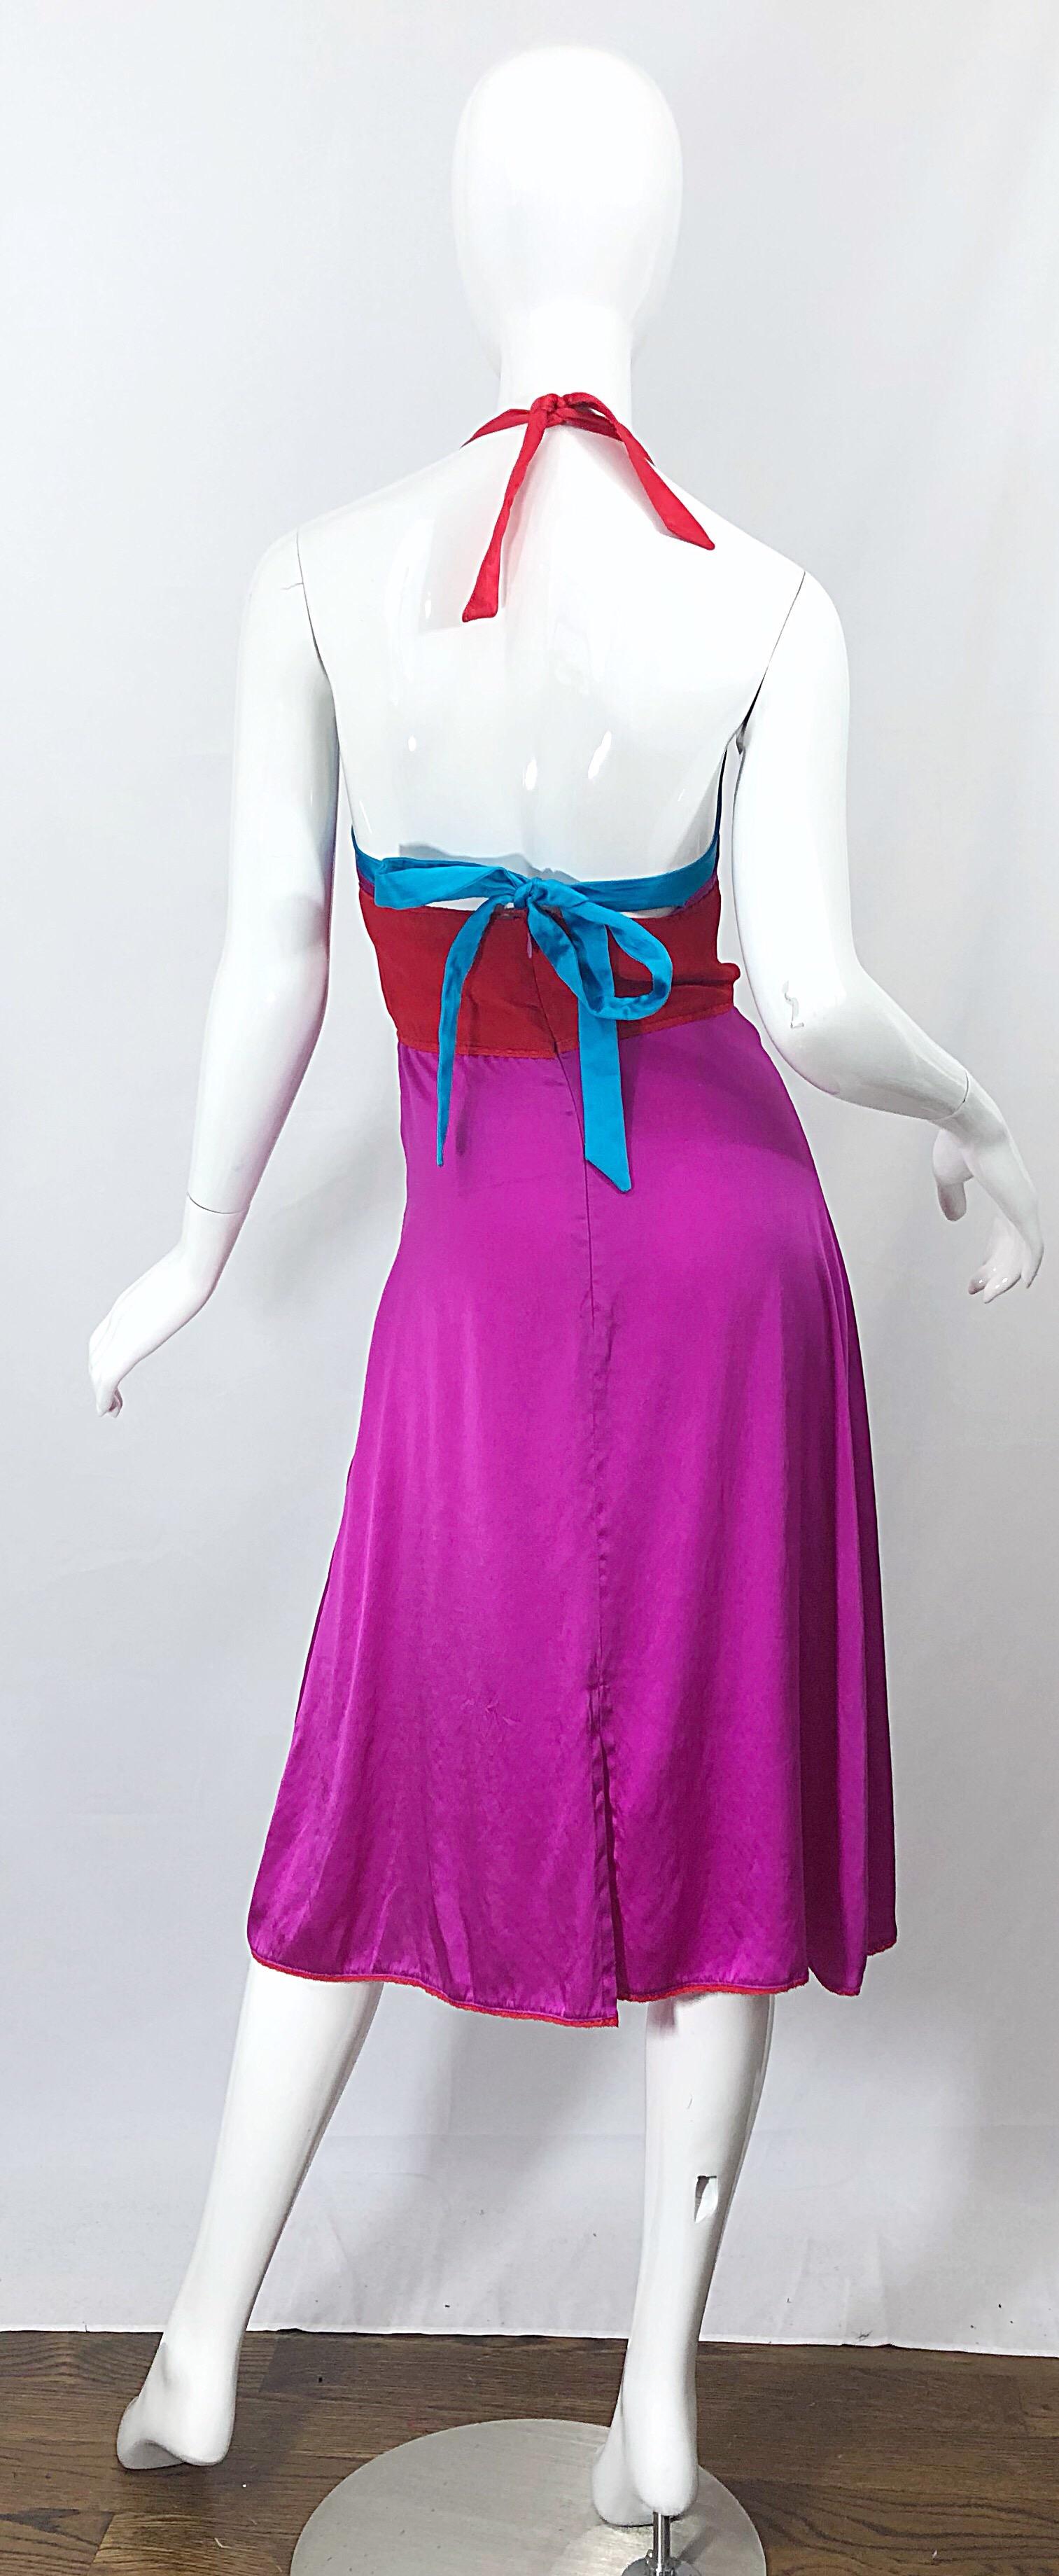 Women's 1990s Gianfranco Ferre Sexy Embroidered Hot Pink Red Blue Vintage Halter Dress